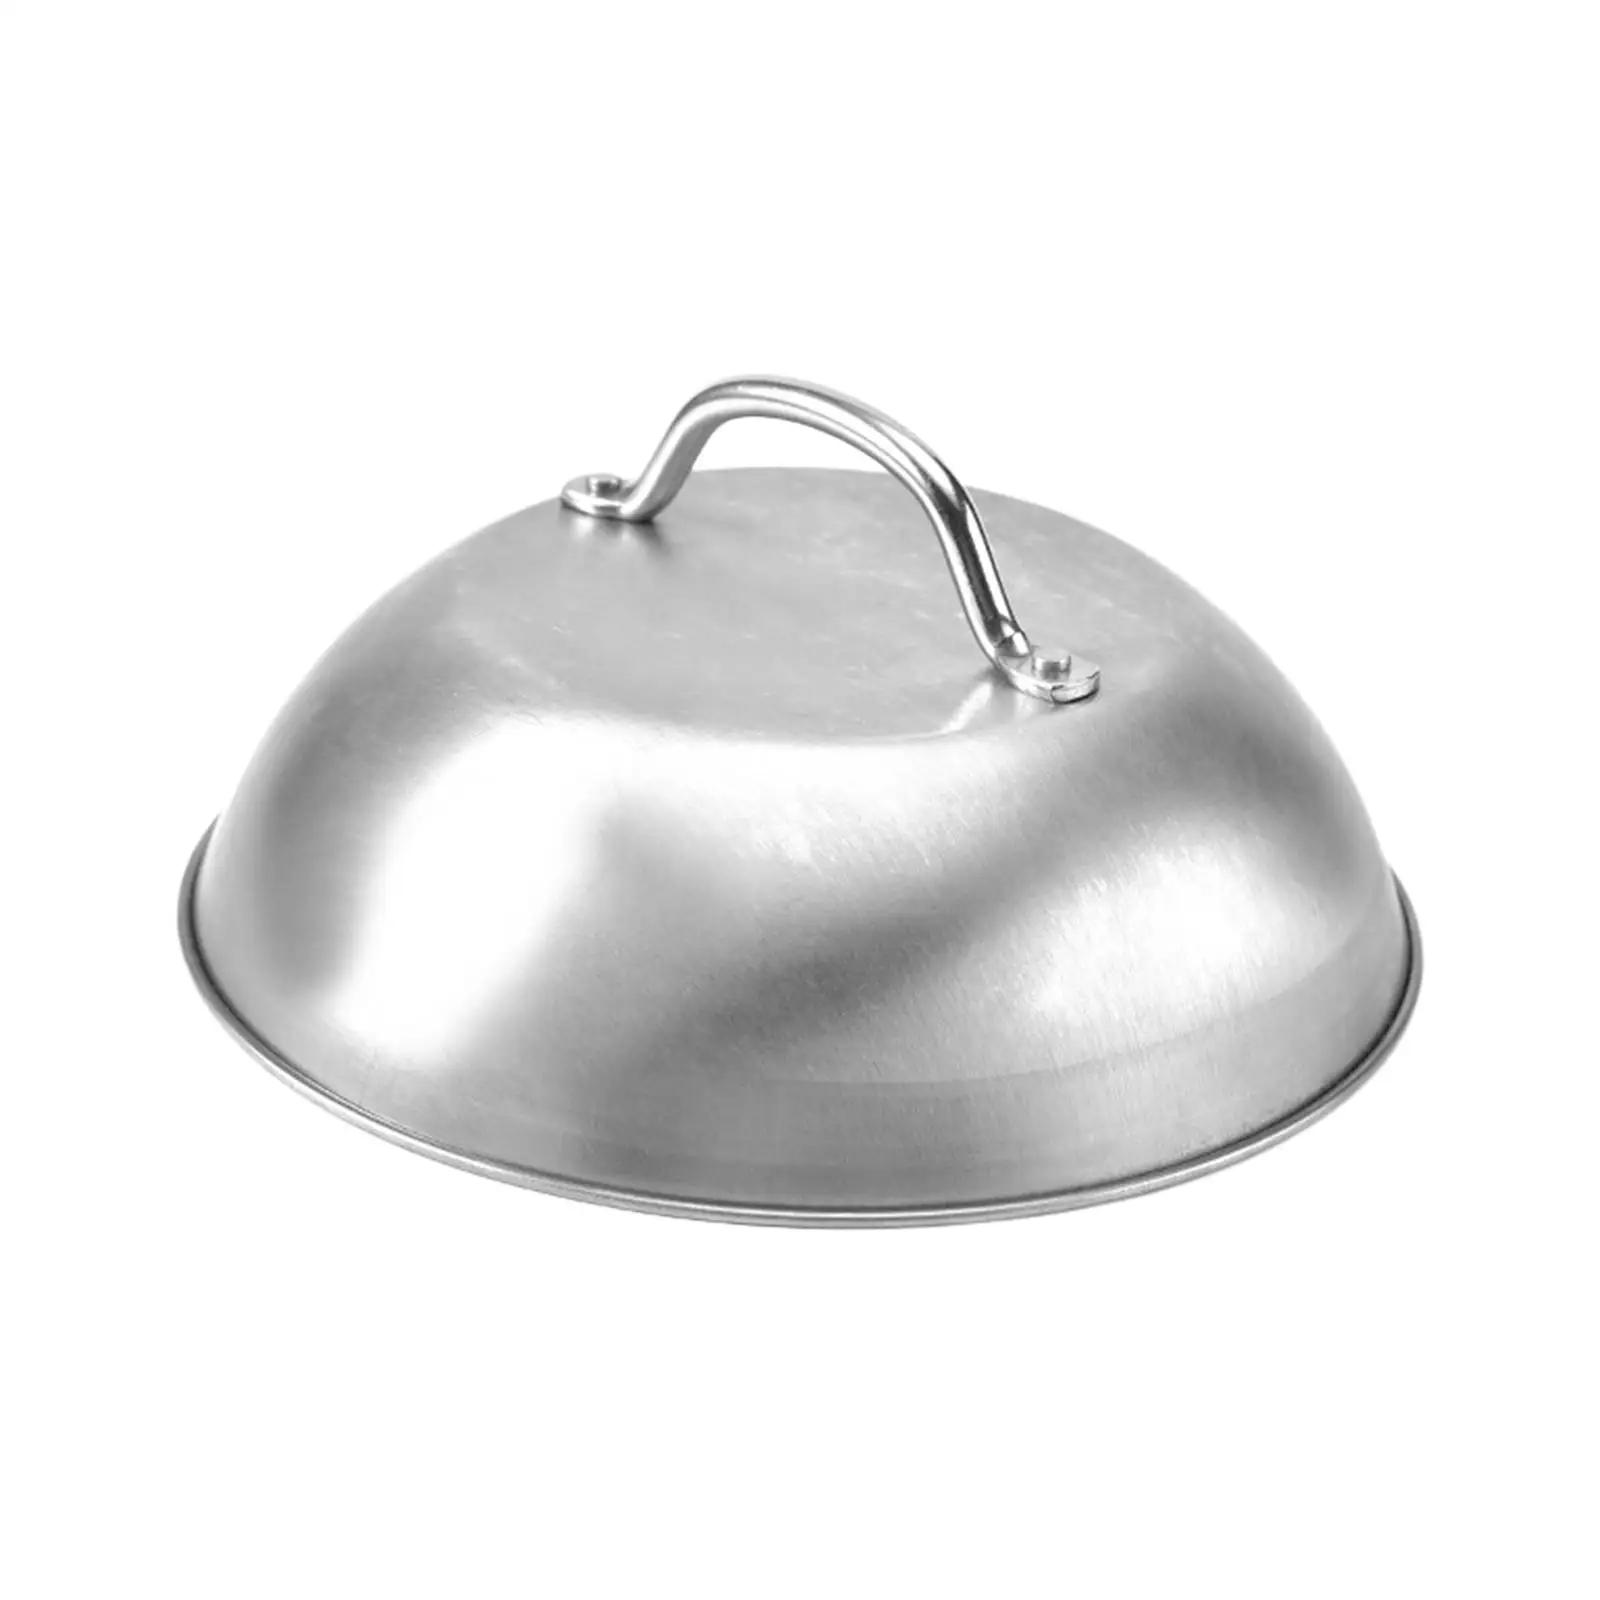 Stainless Steel Basting Covers Steak Cover for Cooking Household Store